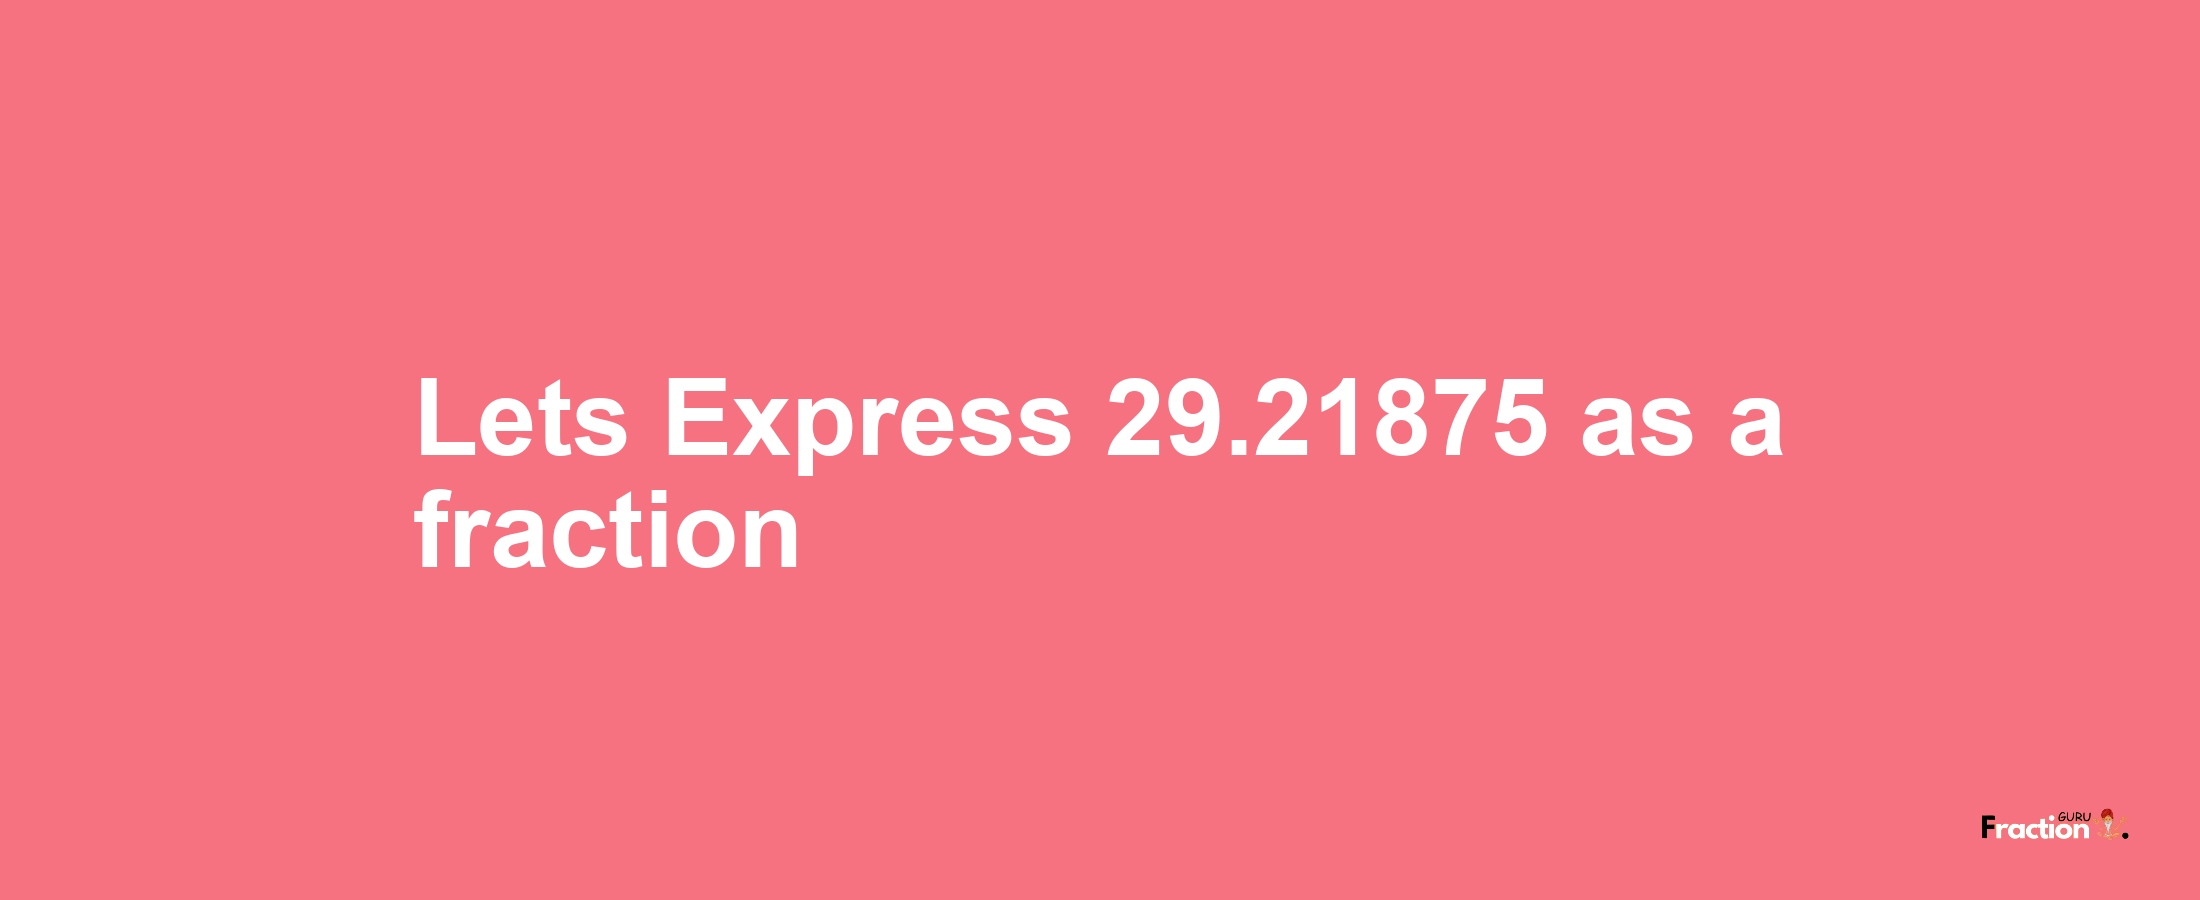 Lets Express 29.21875 as afraction